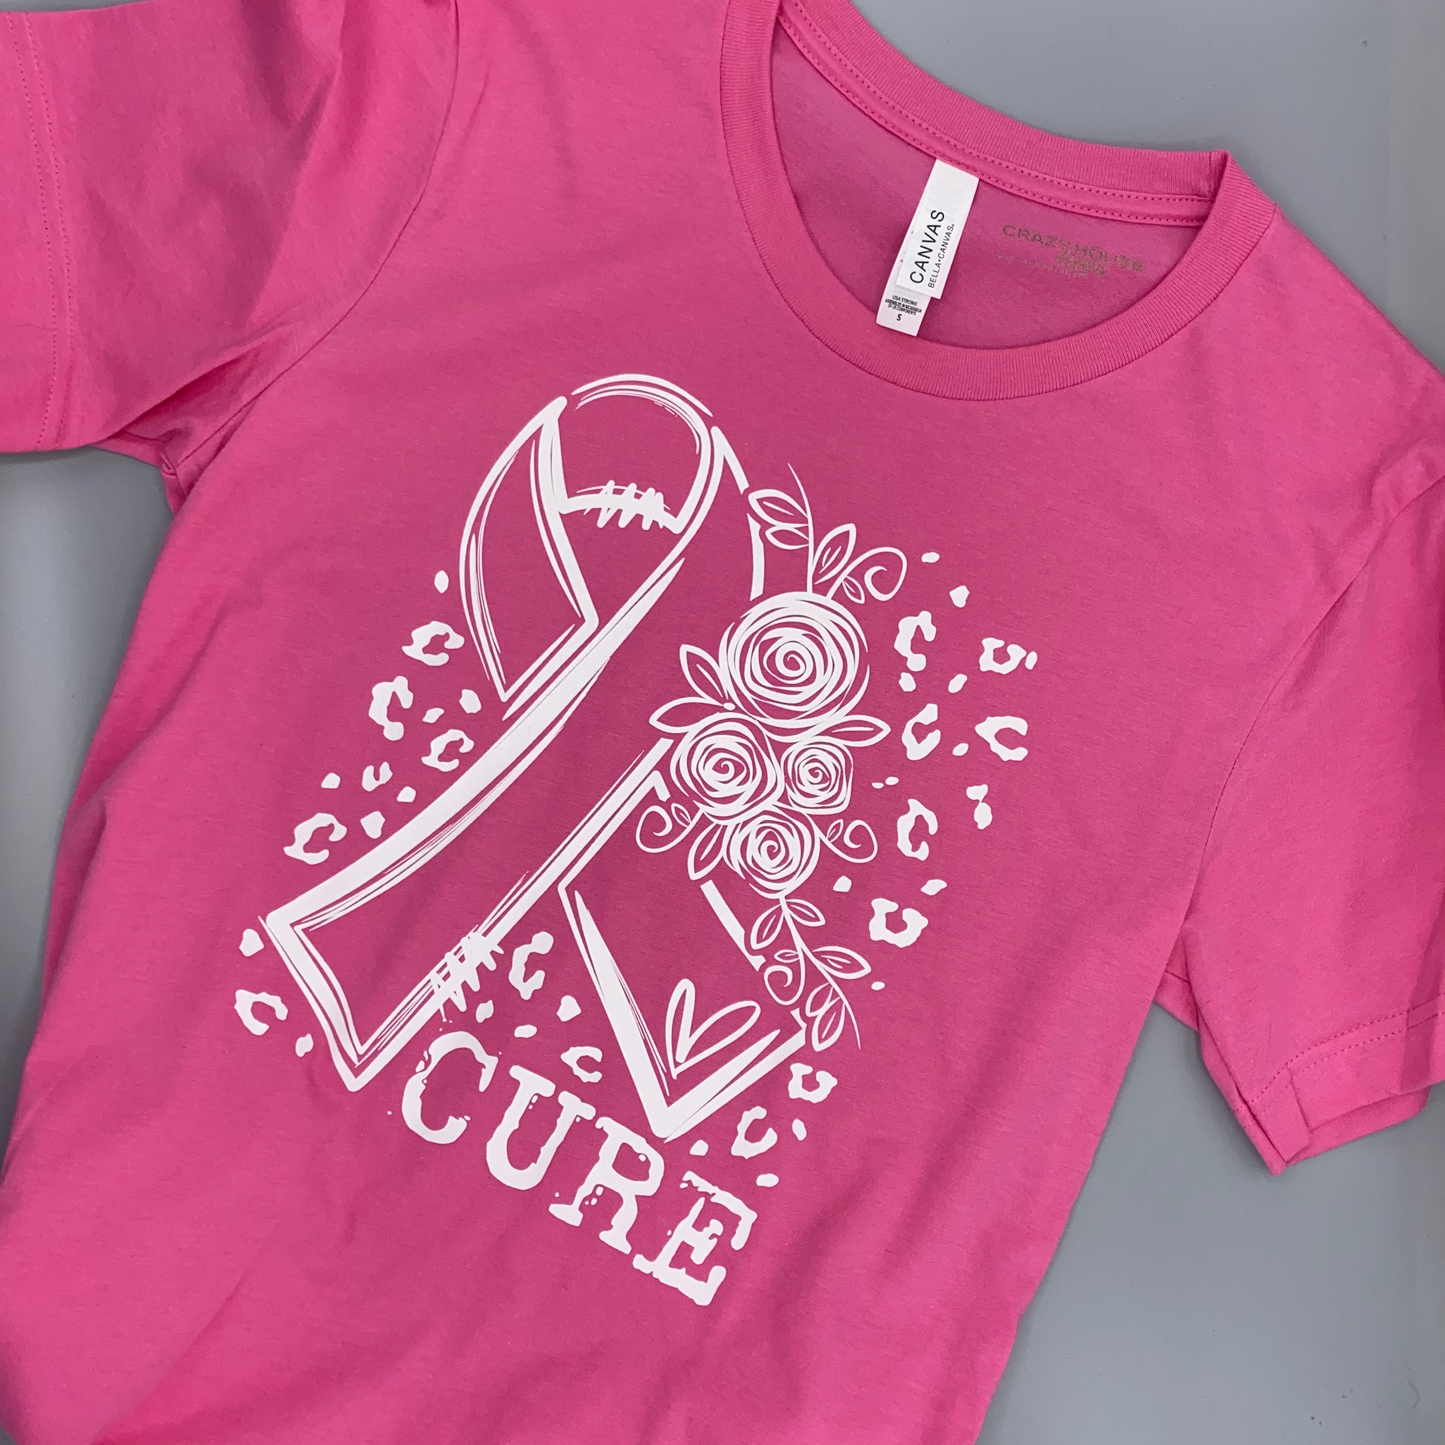 Cure - Breast Cancer - Wear Pink